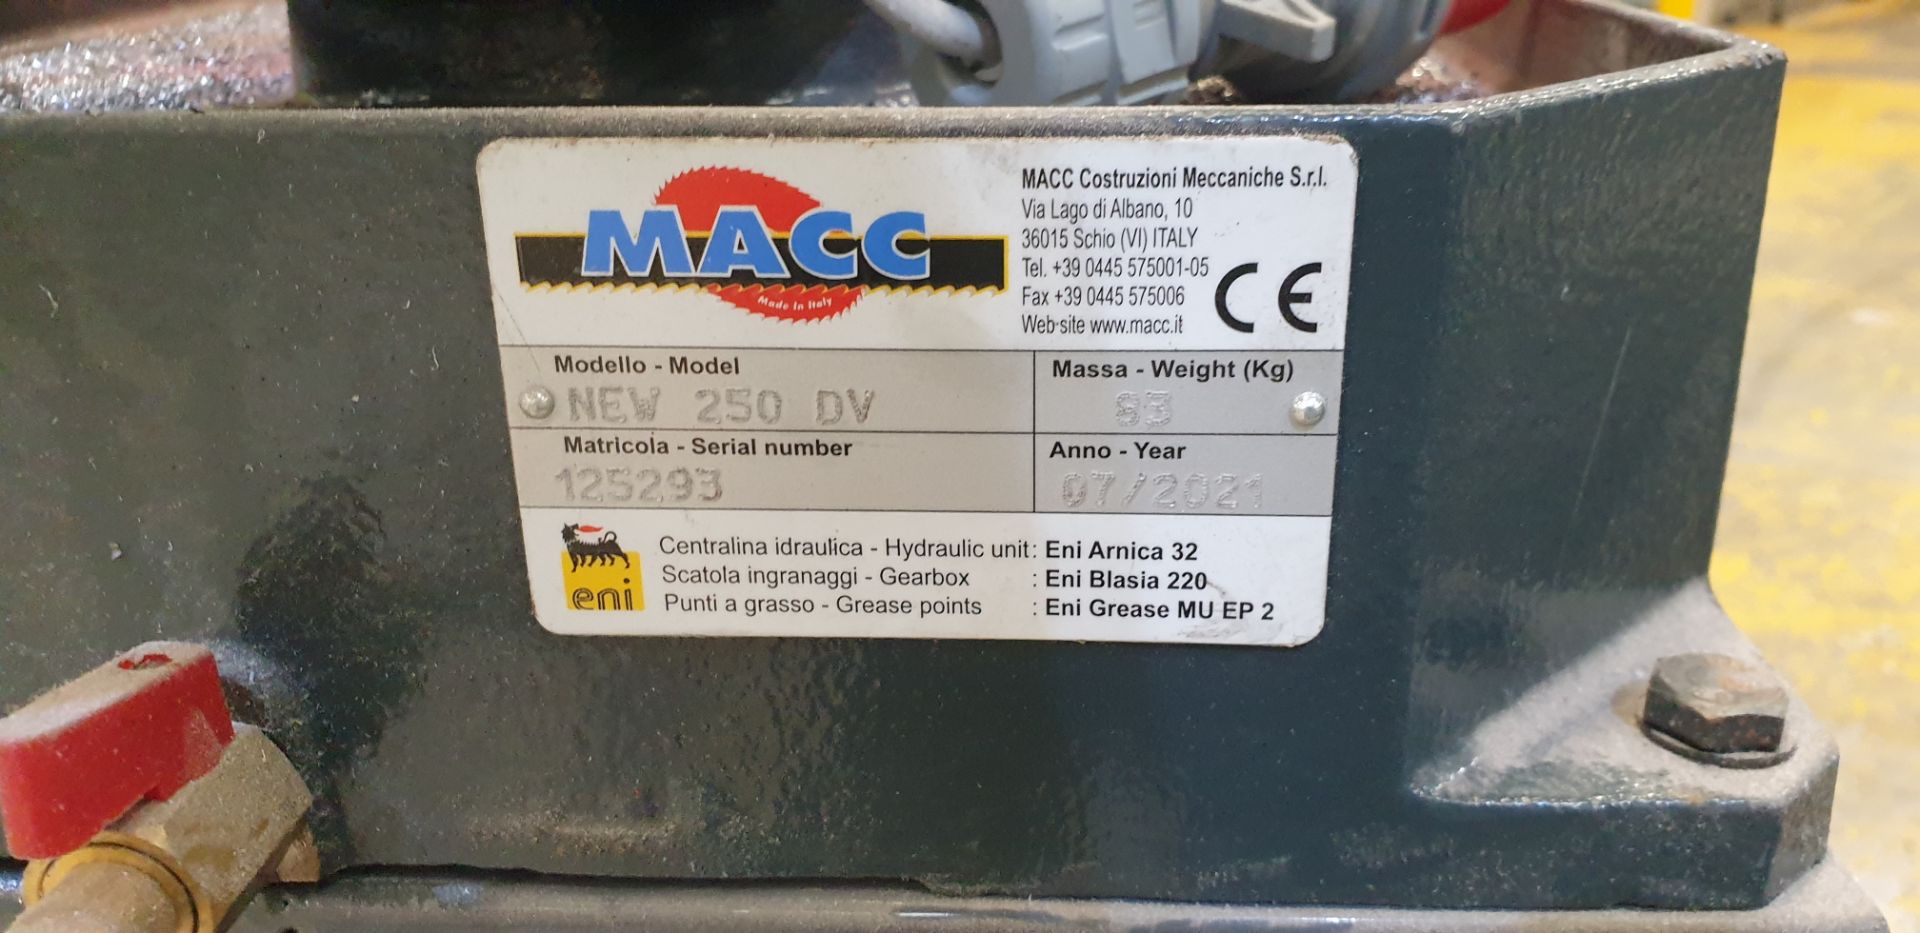 MACC, 250 DV, New Pull-Down Chp Saw, Serial Number: 125293, Year of Manufacture: 2021 - Image 3 of 3